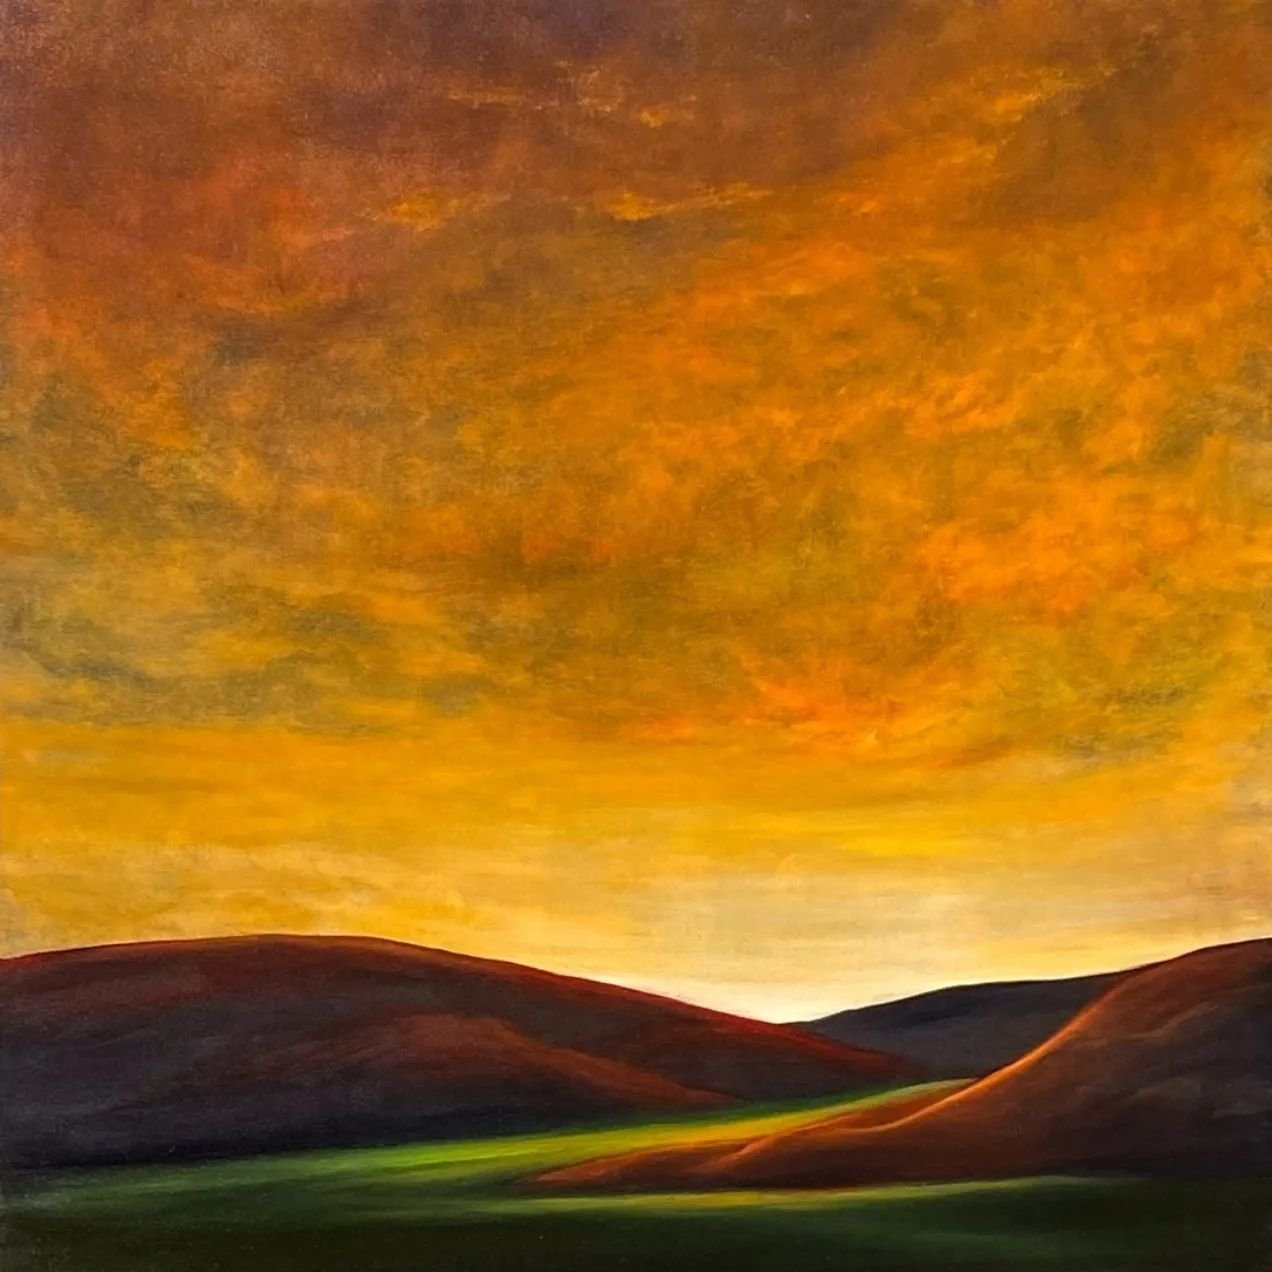 Mandy Main's beautiful piece &quot;Red Hills V&quot; truly showcases her many talents. Her skillful use of depth and lighting in her panoramic landscapes are sure to leave a wonderful lasting impression. 

#dragonfiregallery #mandymain #haystackrock 